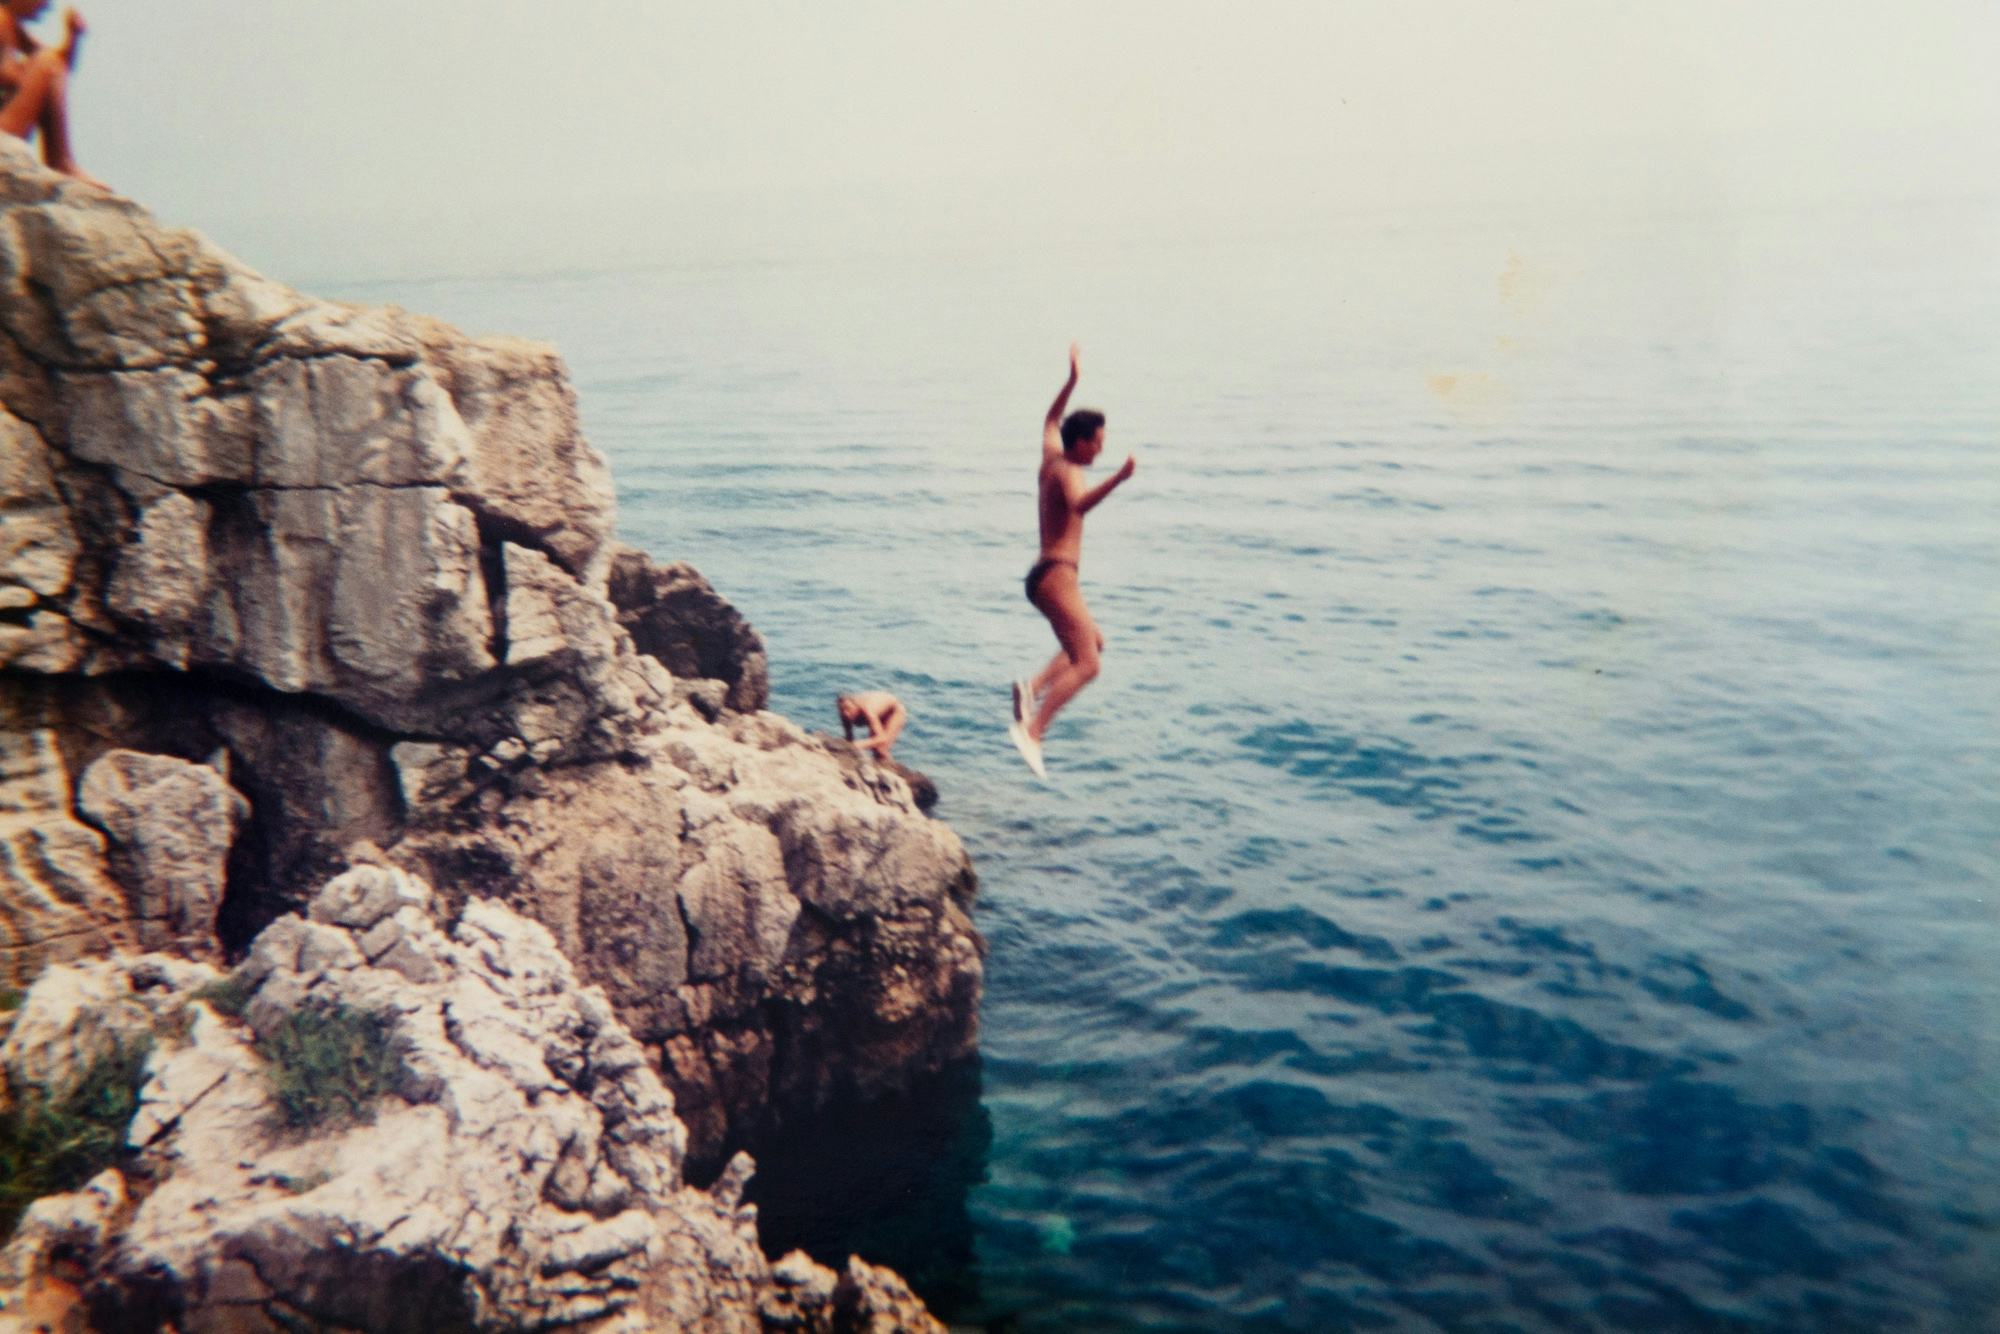 Archival holiday picture from the artist's personal archive, showing swimmers jumping into the ocean from a rock formation© Sander Coers